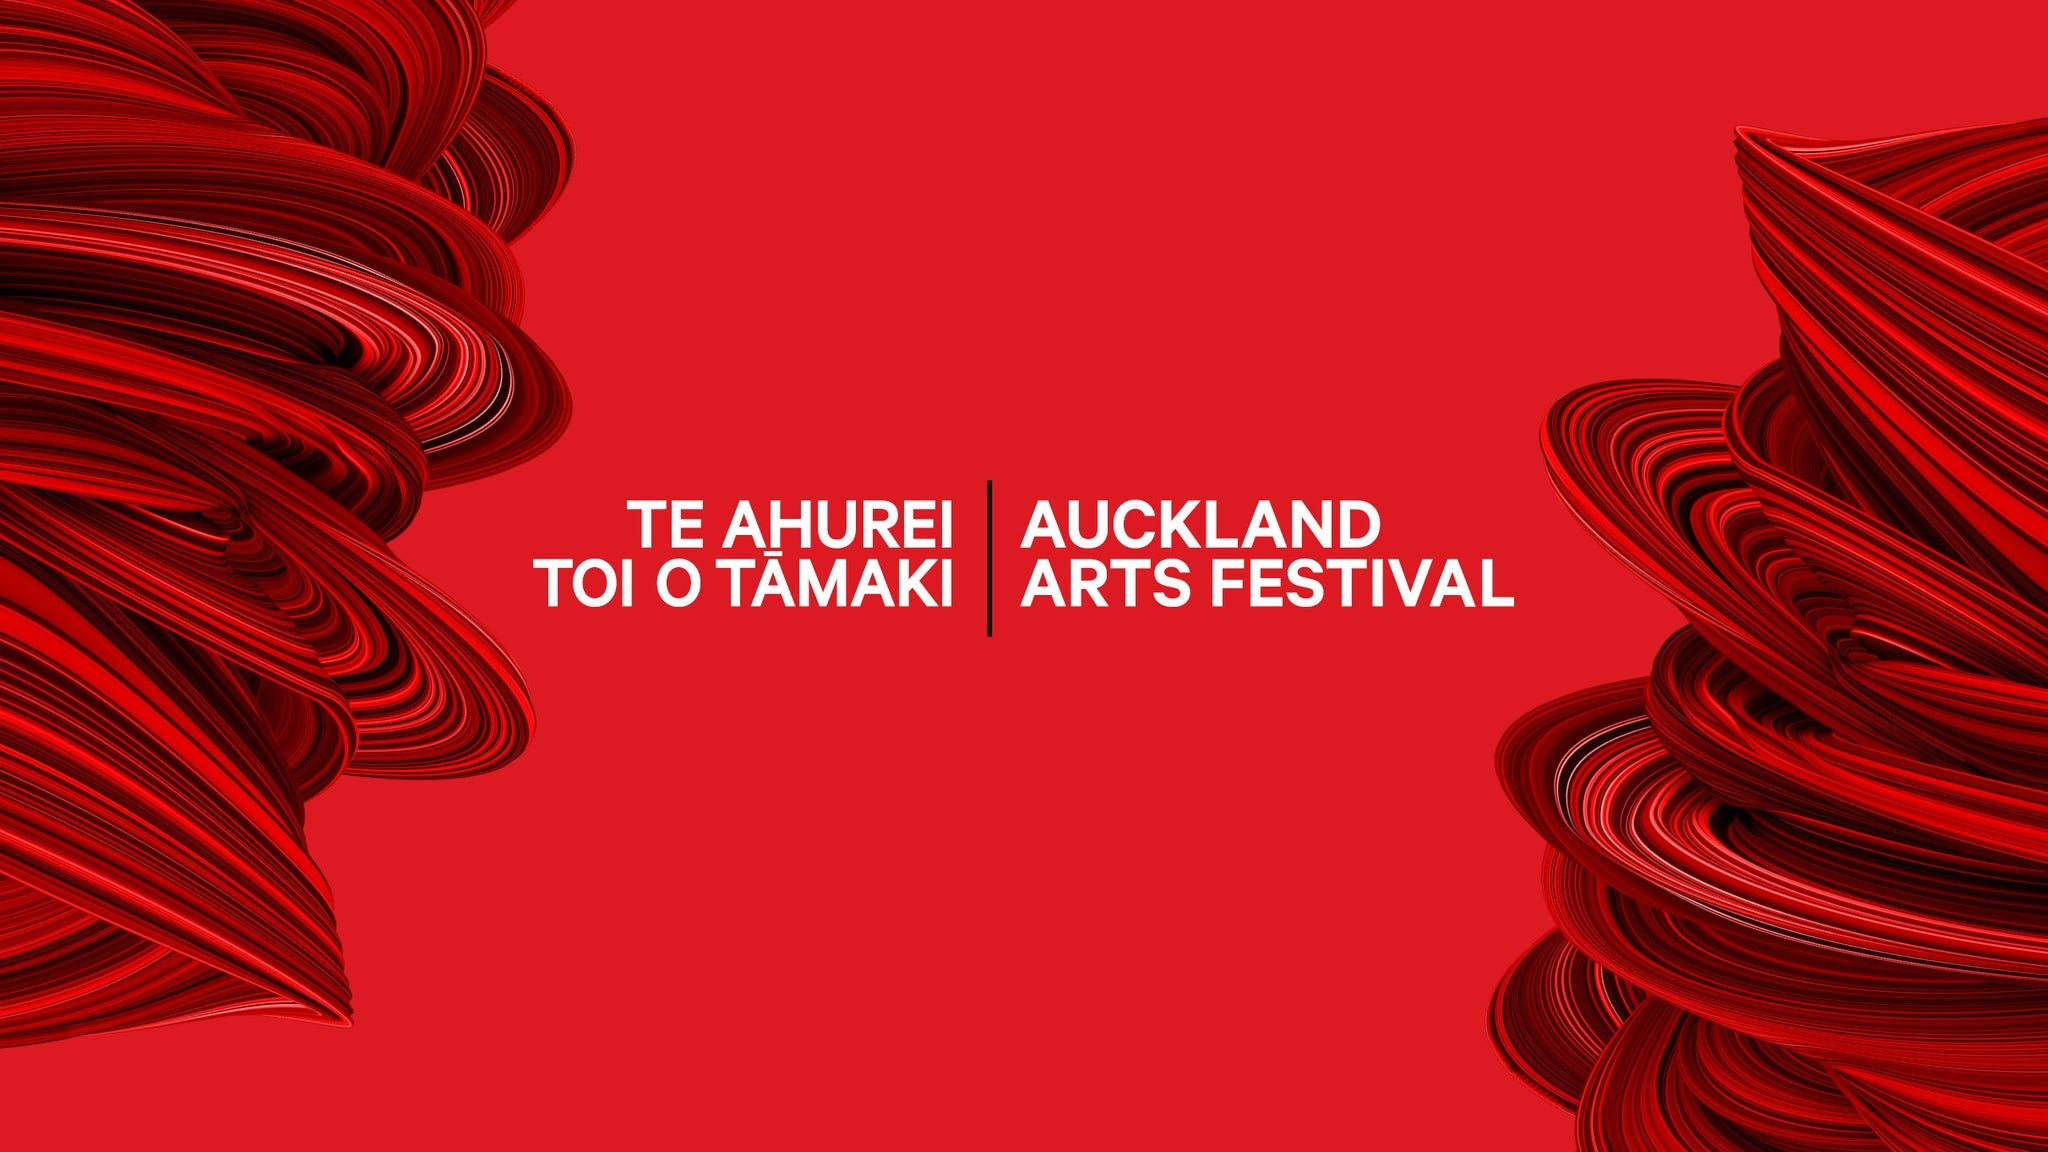 Image used with permission from Ticketmaster | AKLFEST: Boy tickets